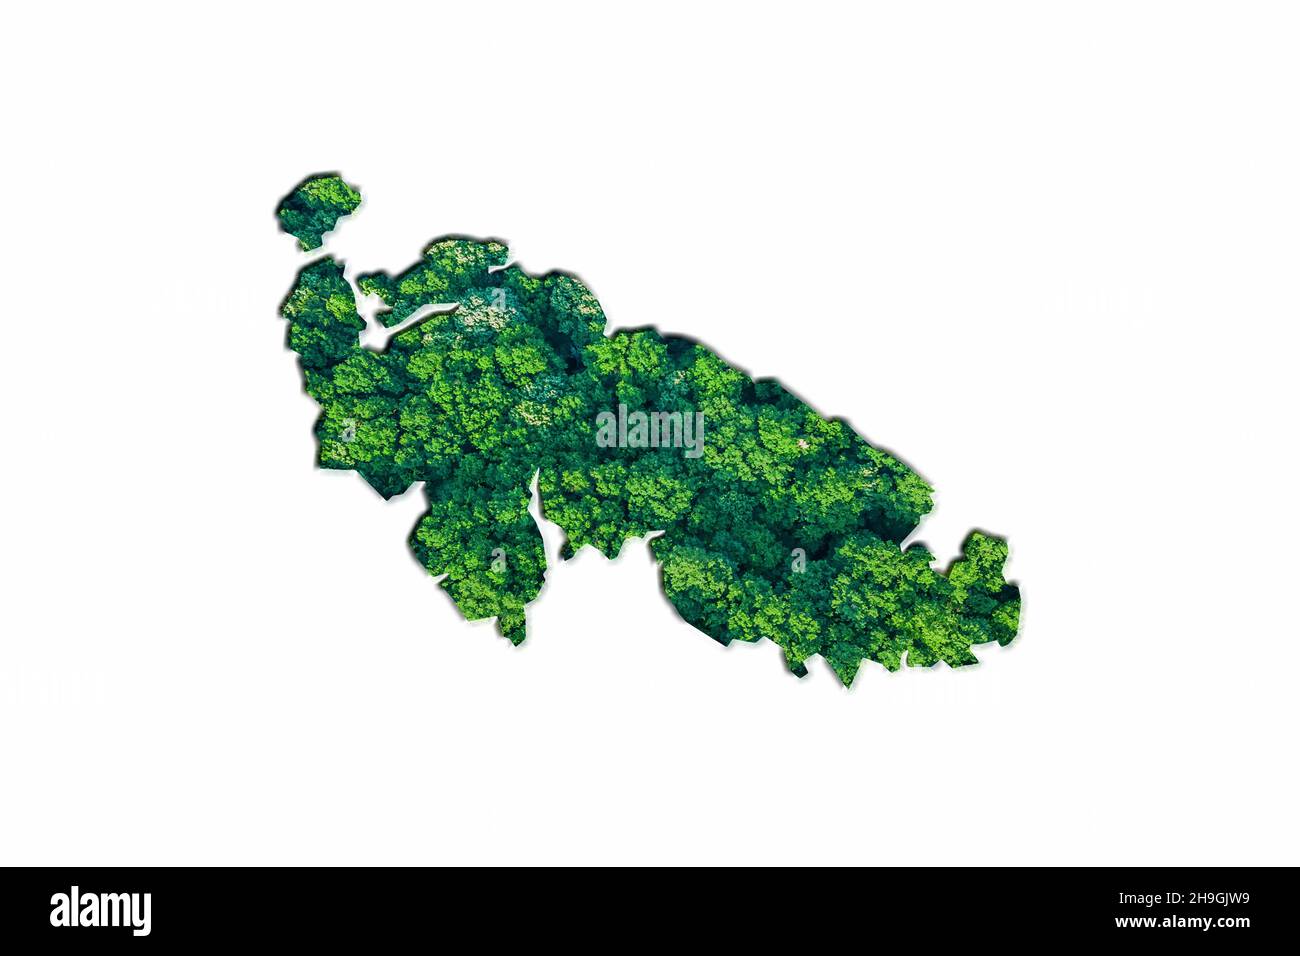 Green Forest Map of Aland Islands, on white background Stock Photo